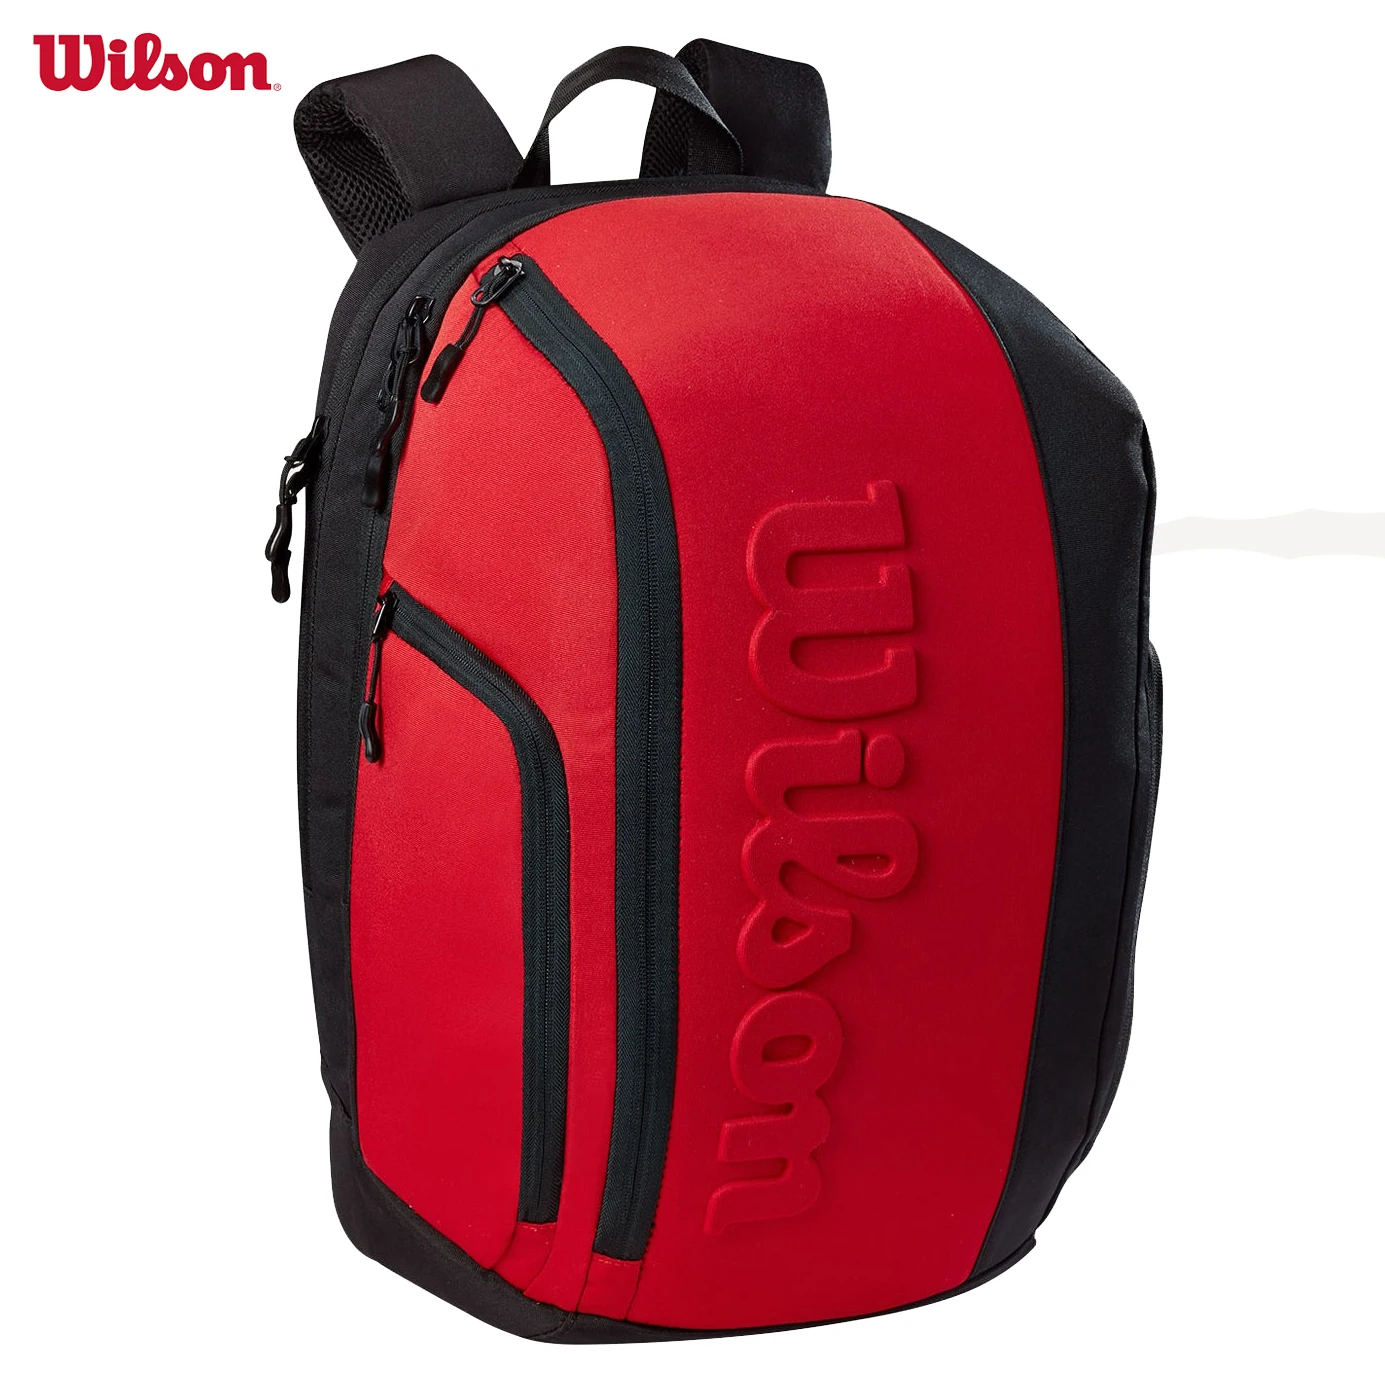 Wilson Super Tour Embossed Design PU Tennis Backpack for 2 Rackets PET Tennis Bag Wtih Padded Compartment Clash V2 Red WR8016601